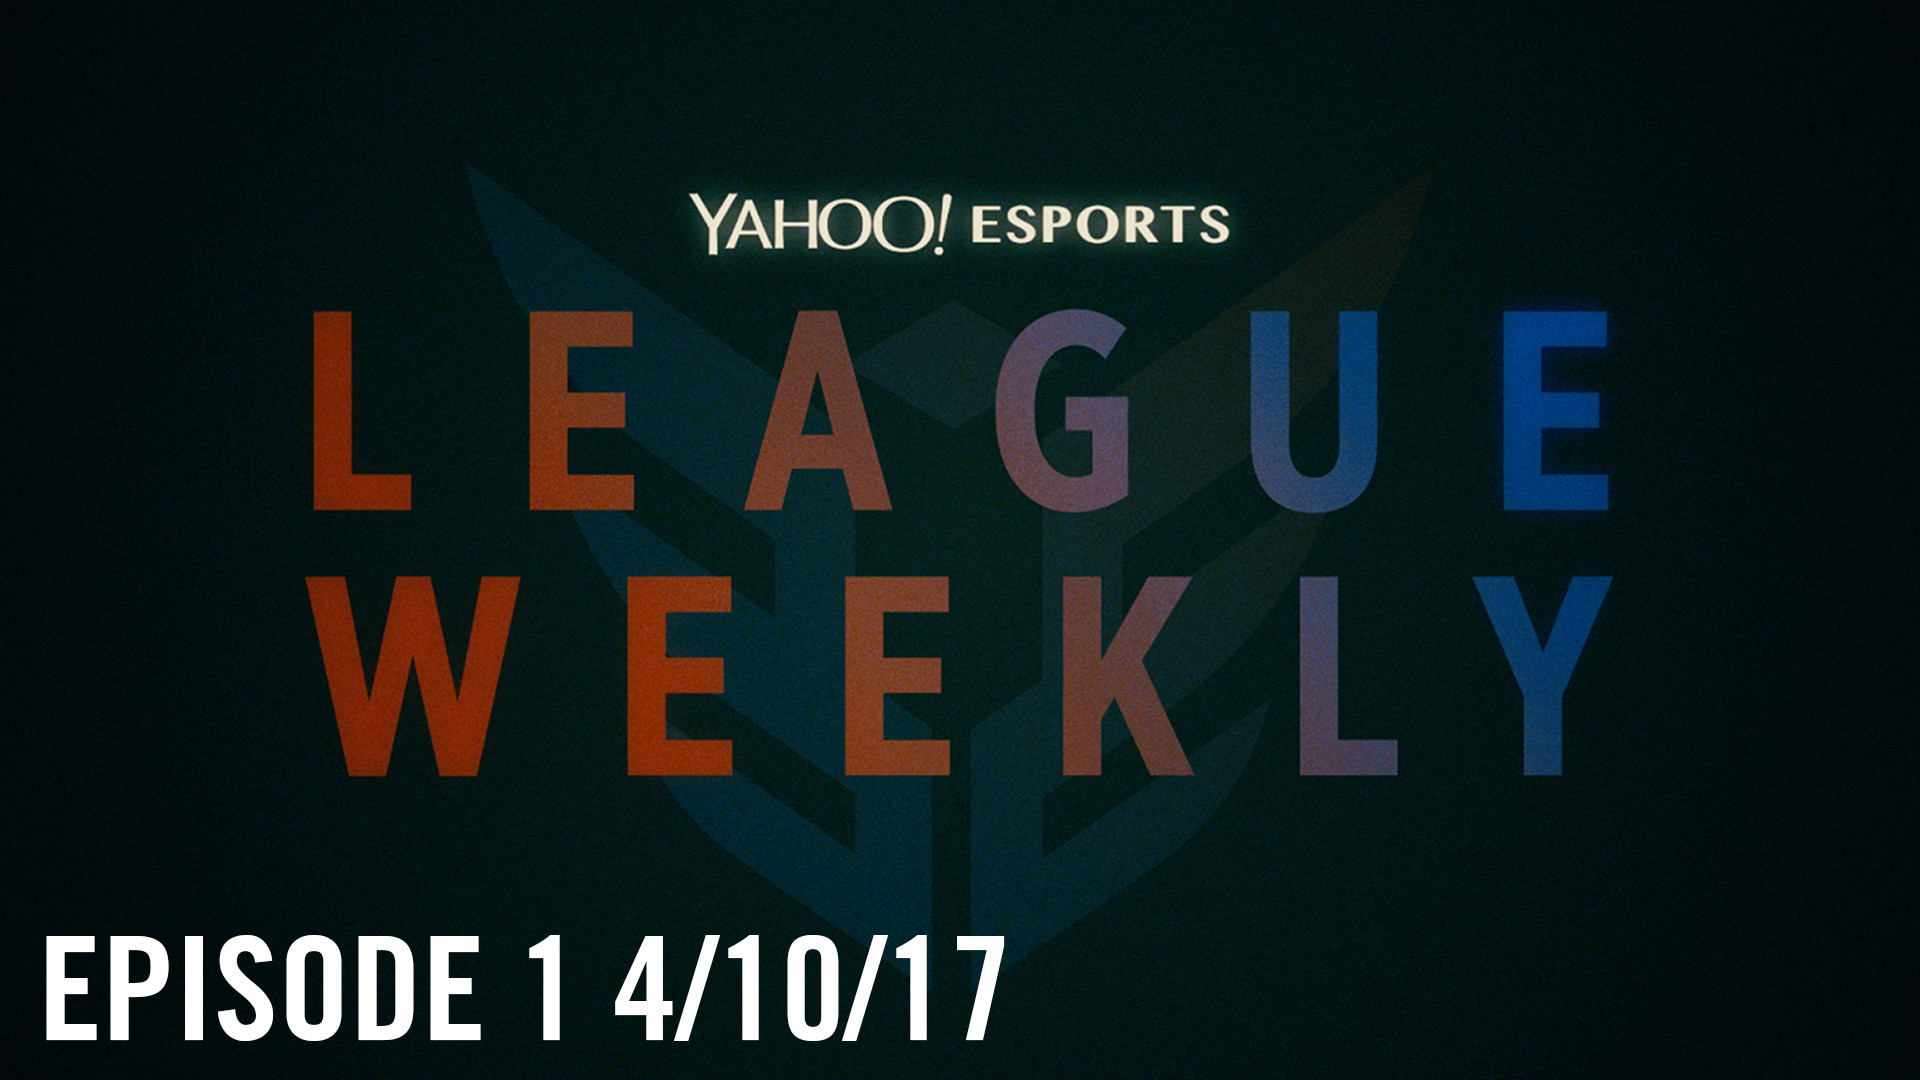 LCS playoffs, Doublelift, voting controversies, and more League Weekly Video